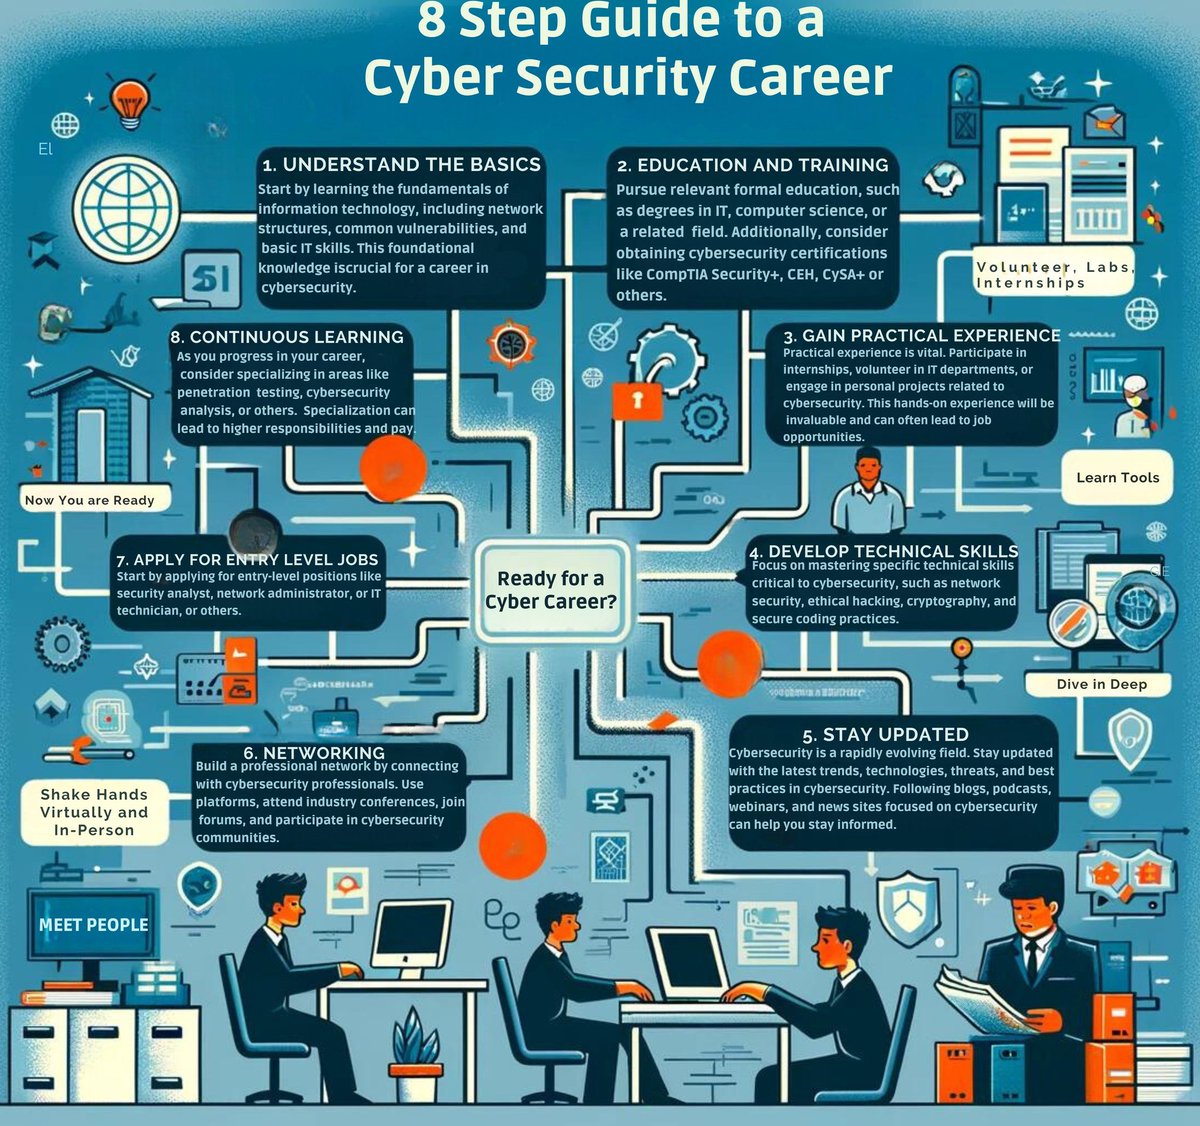 🧑‍🏫Cheat Code to Starting a Career in Cyber Security 1. Learn the Basics: Study basic skills (networking and basic IT skills) 2. Education and Training: Obtain a degree or certifications like CompTIA Security+, Google Cert, or even CySA+. 3. Gain Experience: Signup for in